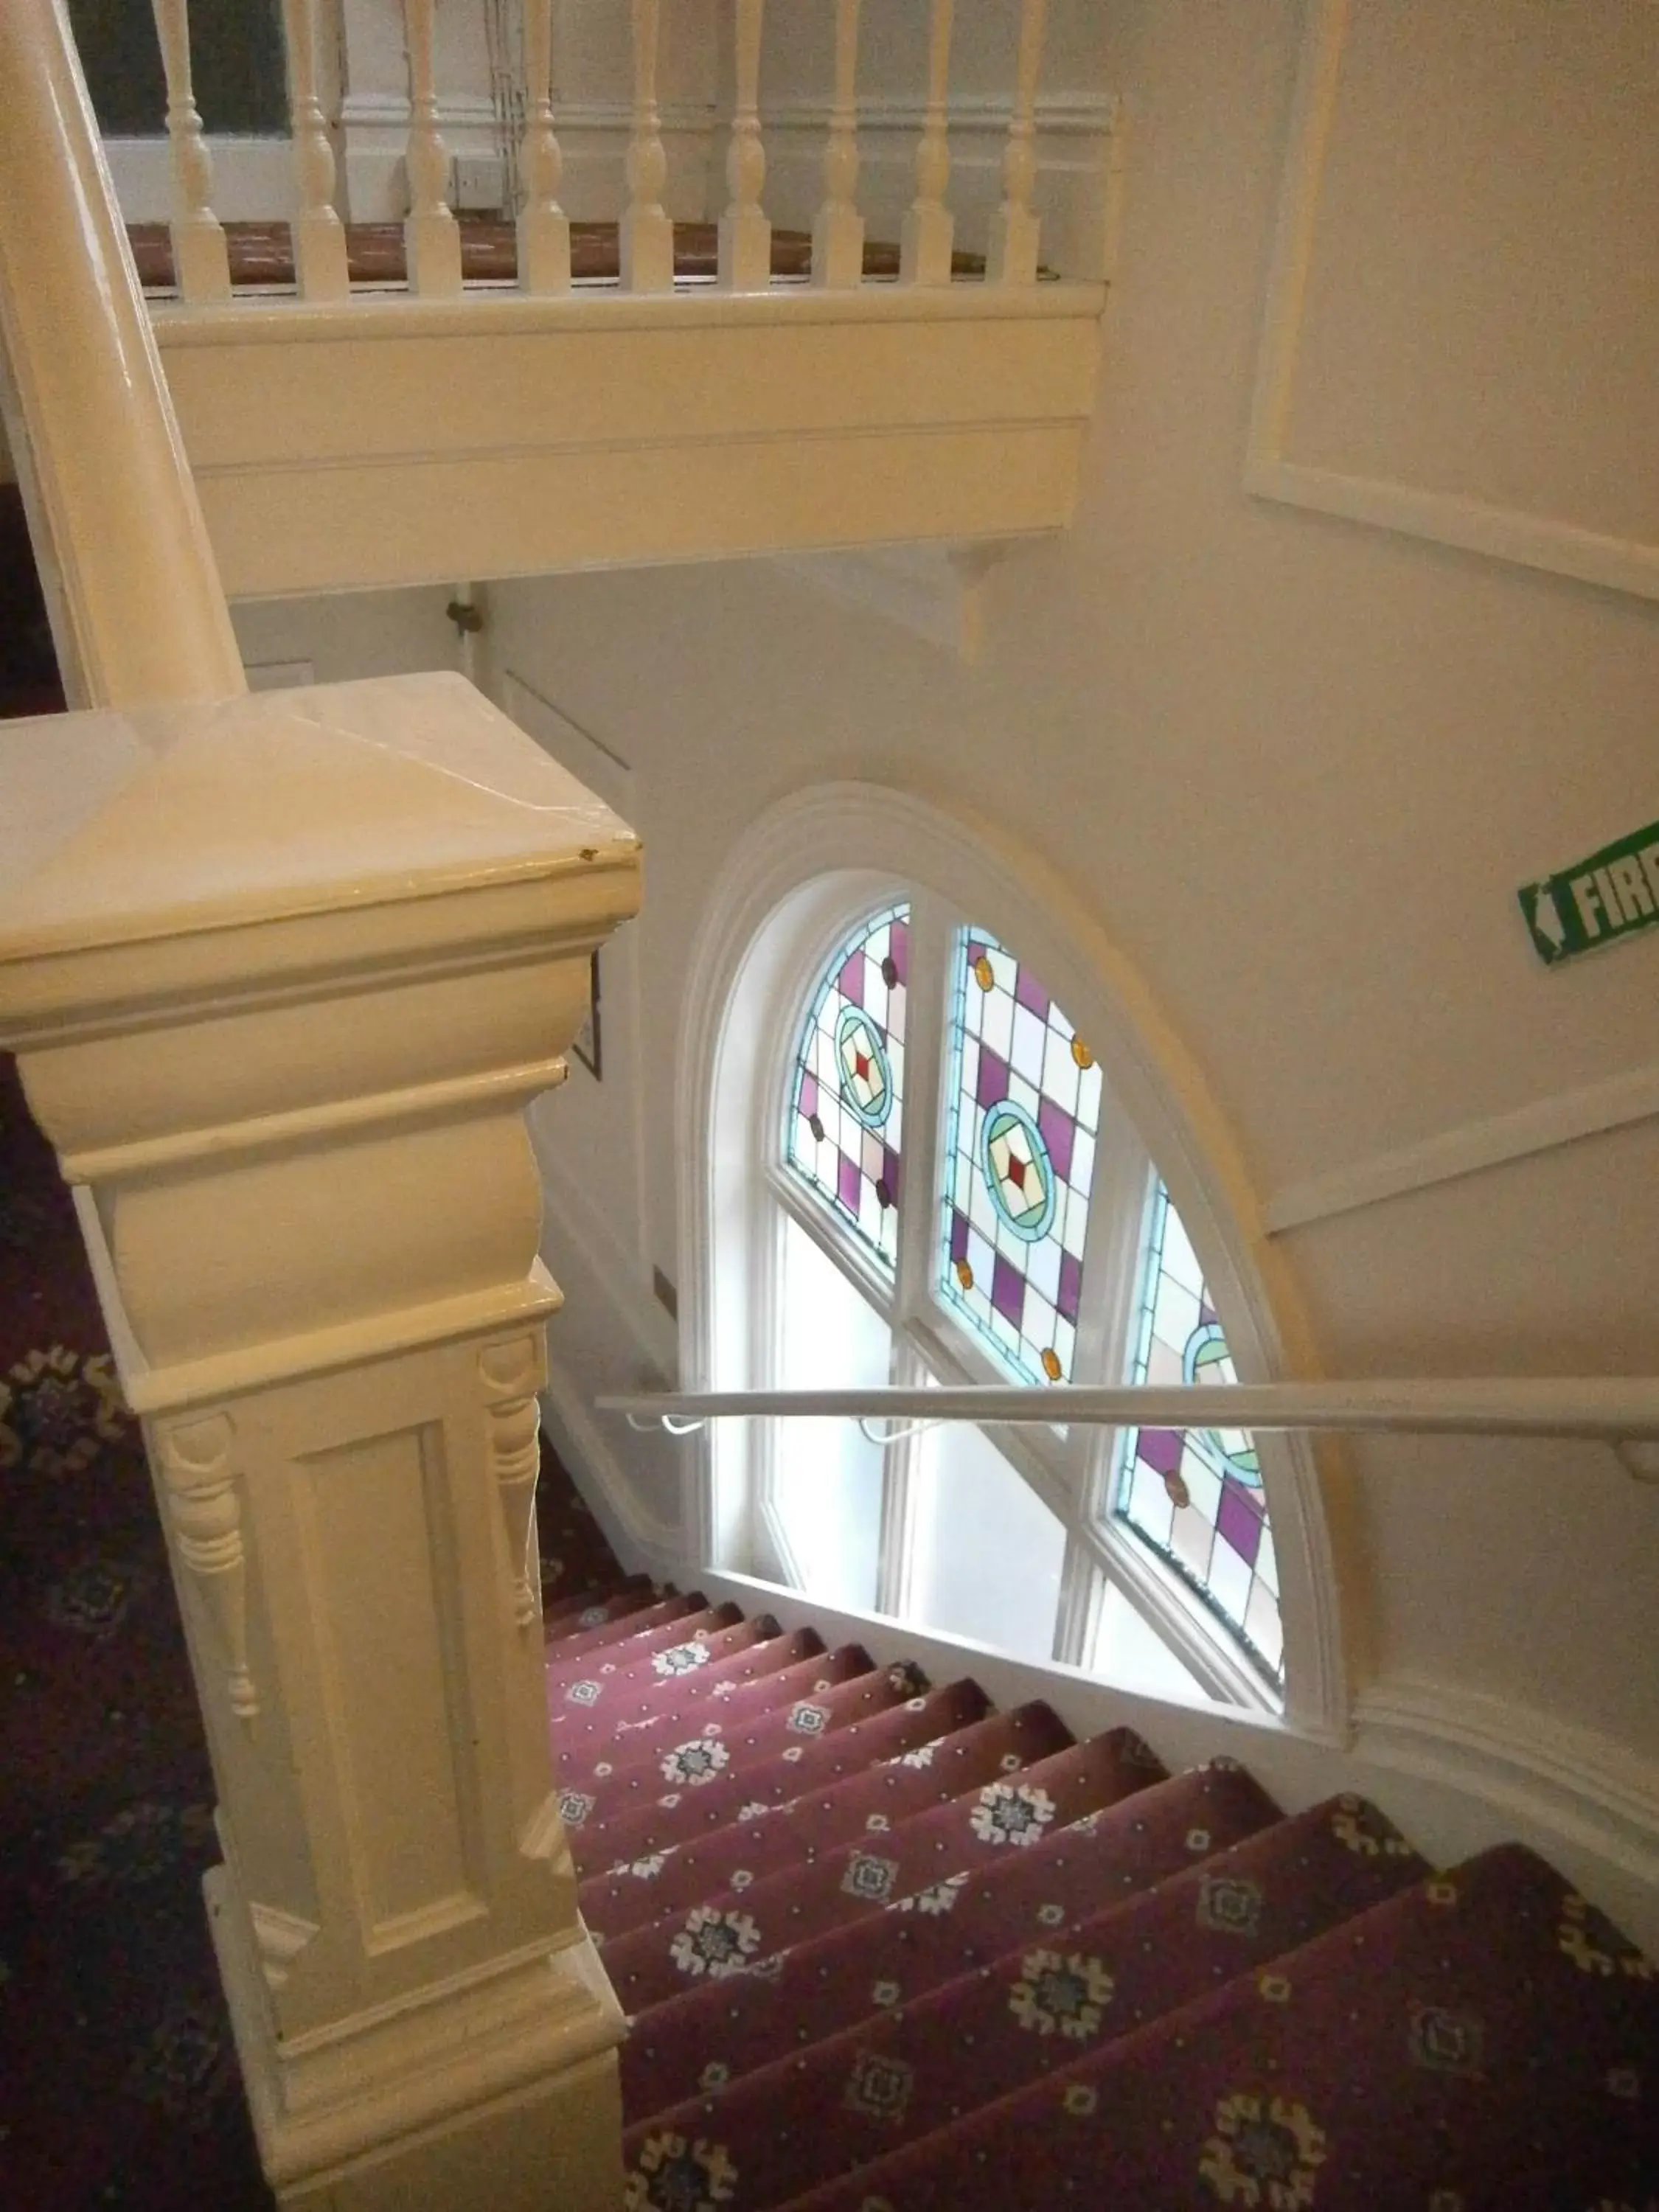 Decorative detail in The Manchester Hotel